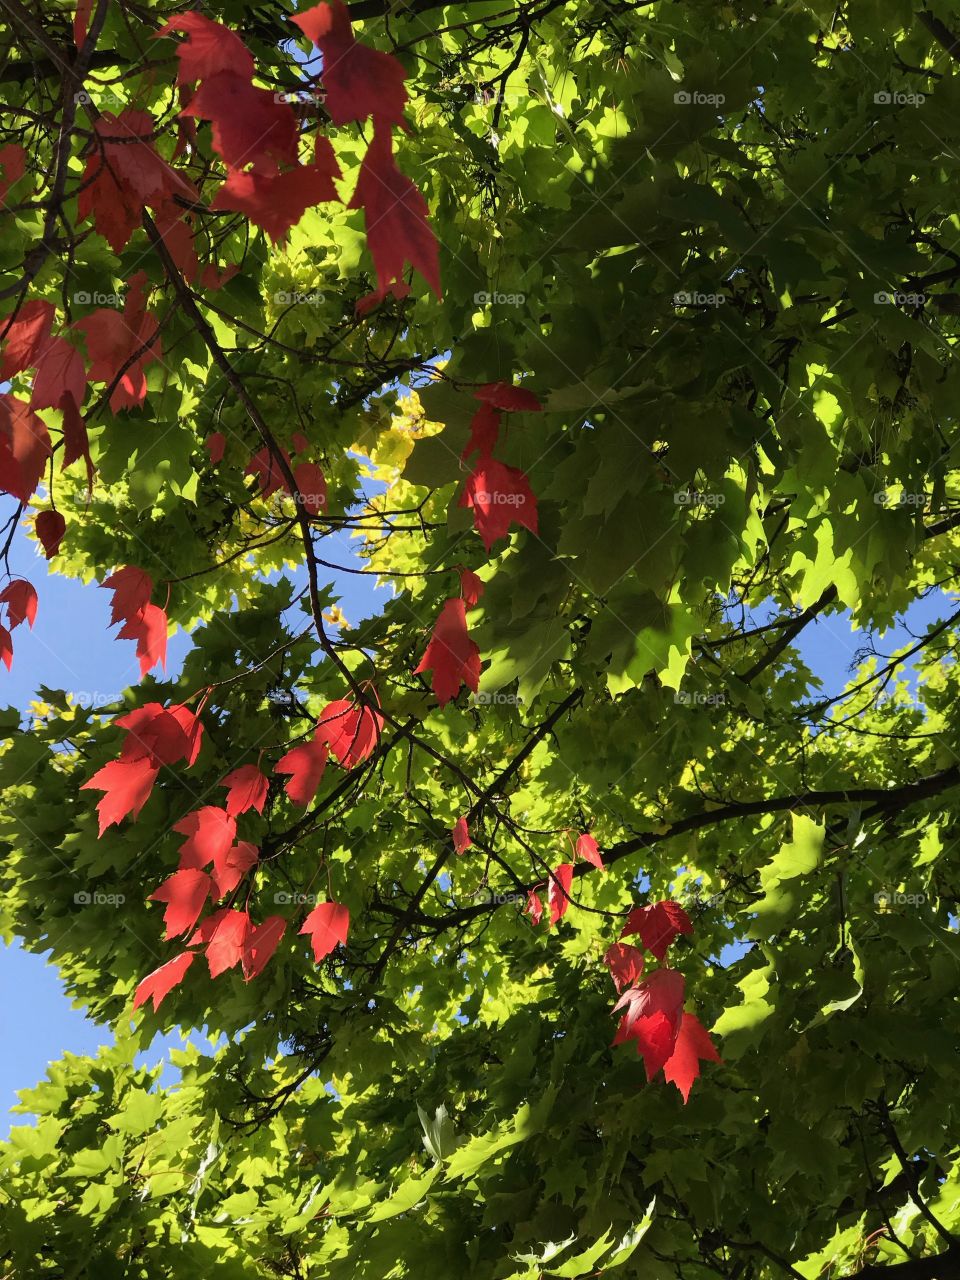 Stunning red maple leaves illuminated by the sun contrast with green maple leaves that haven't turned to their fall colors yet on a sunny fall day.